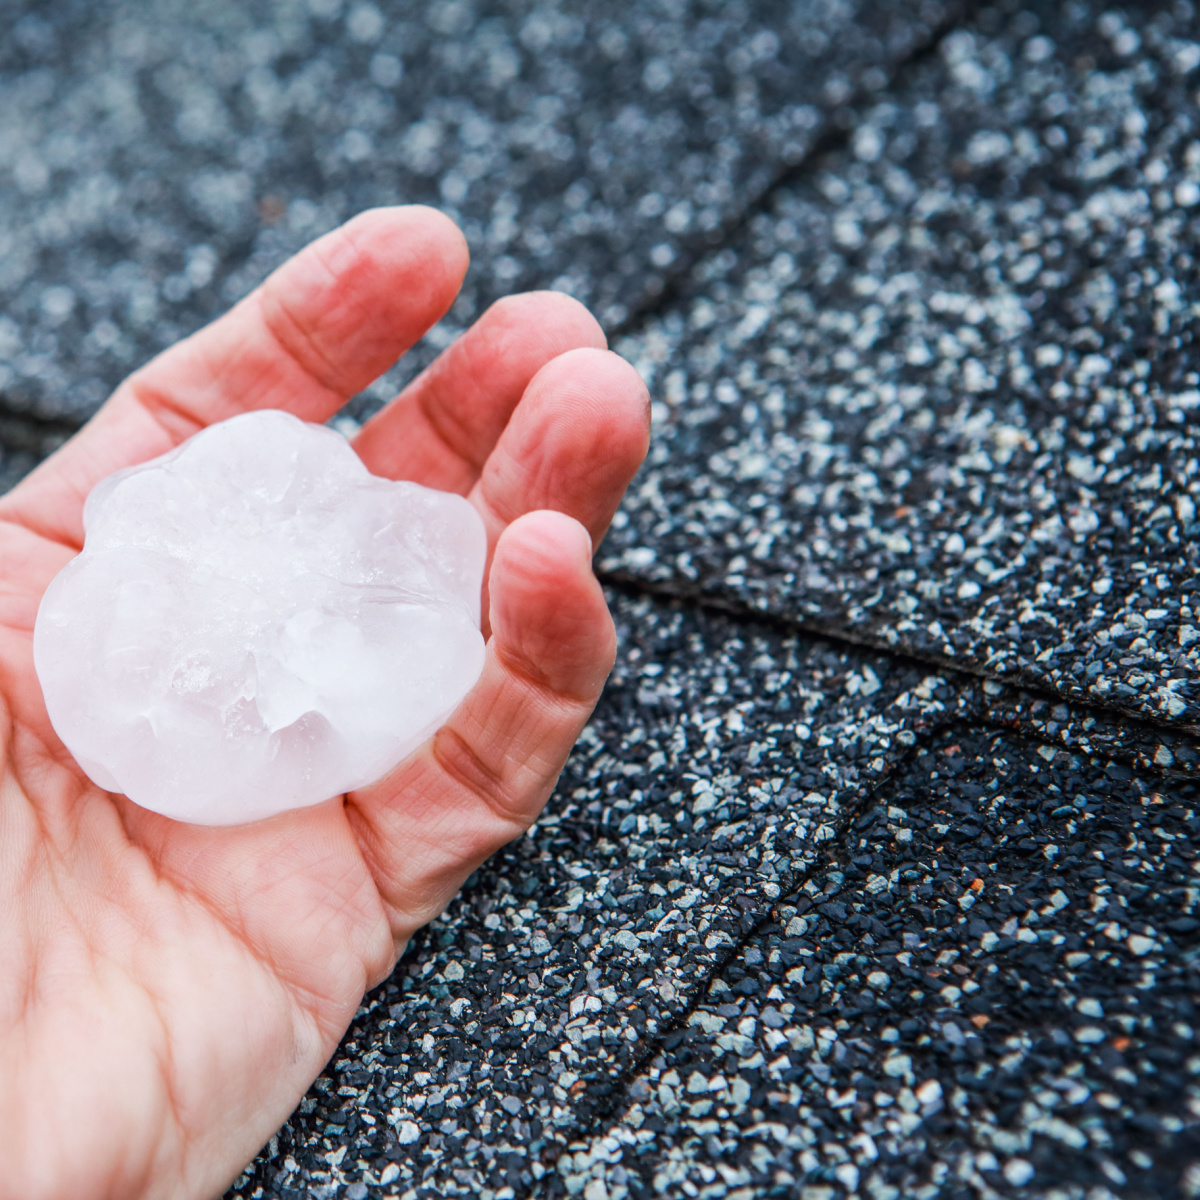 Signs Your Dallas Roof Has Hail Damage